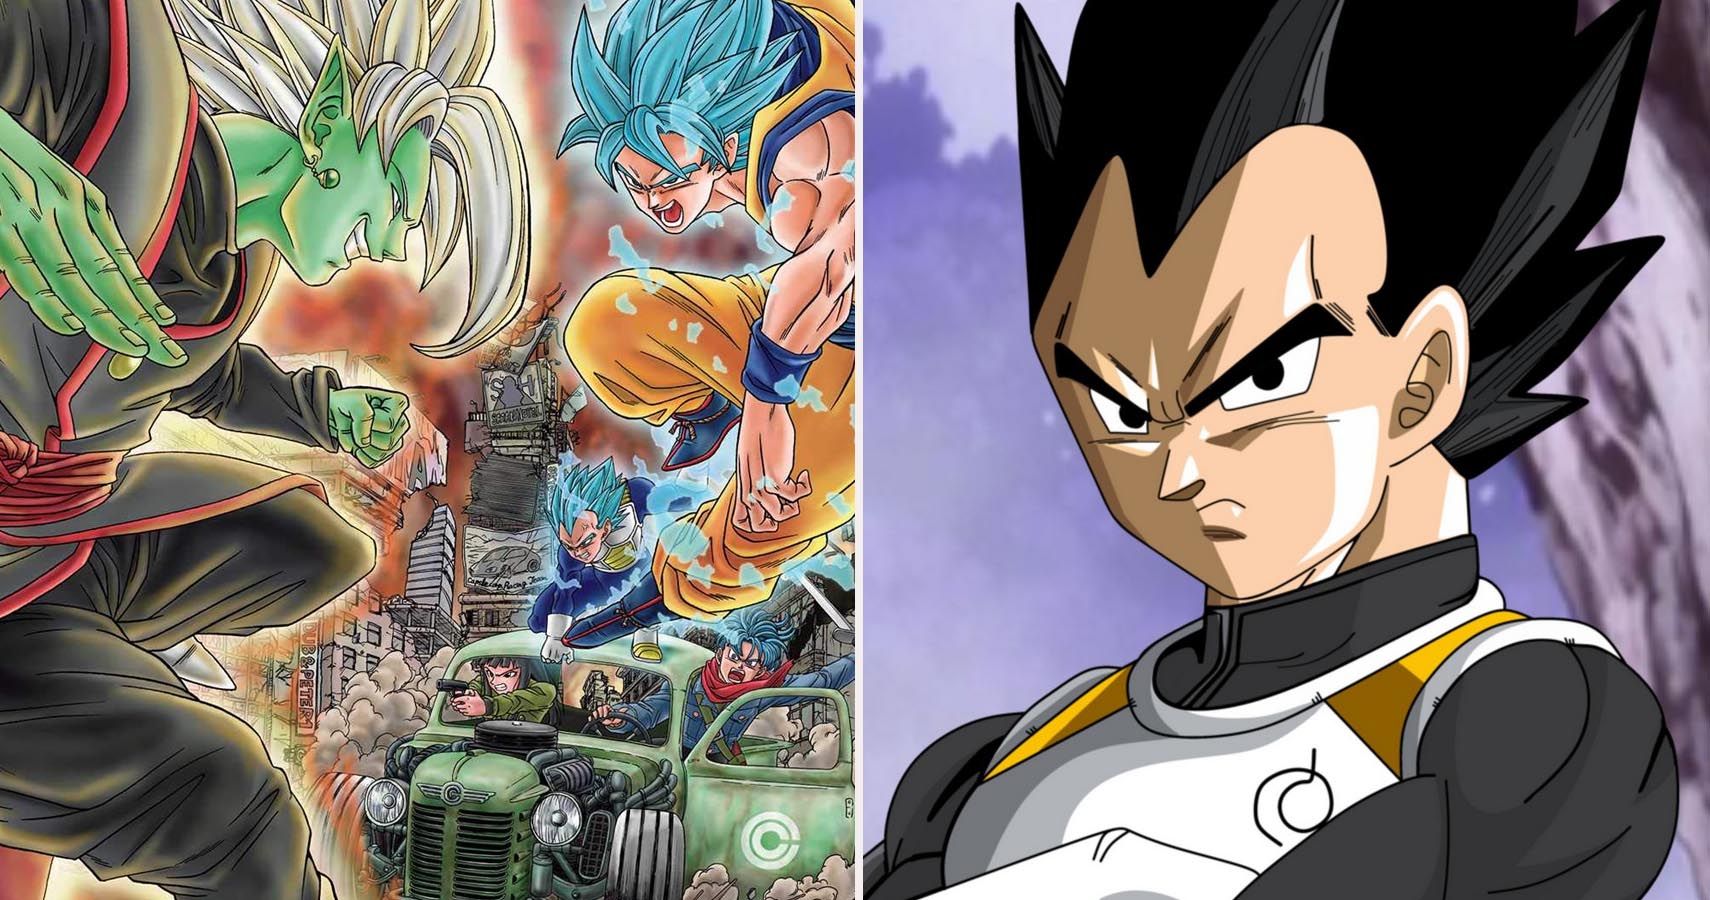 So even tho alot of the stuff in the DBS anime is not in the manga